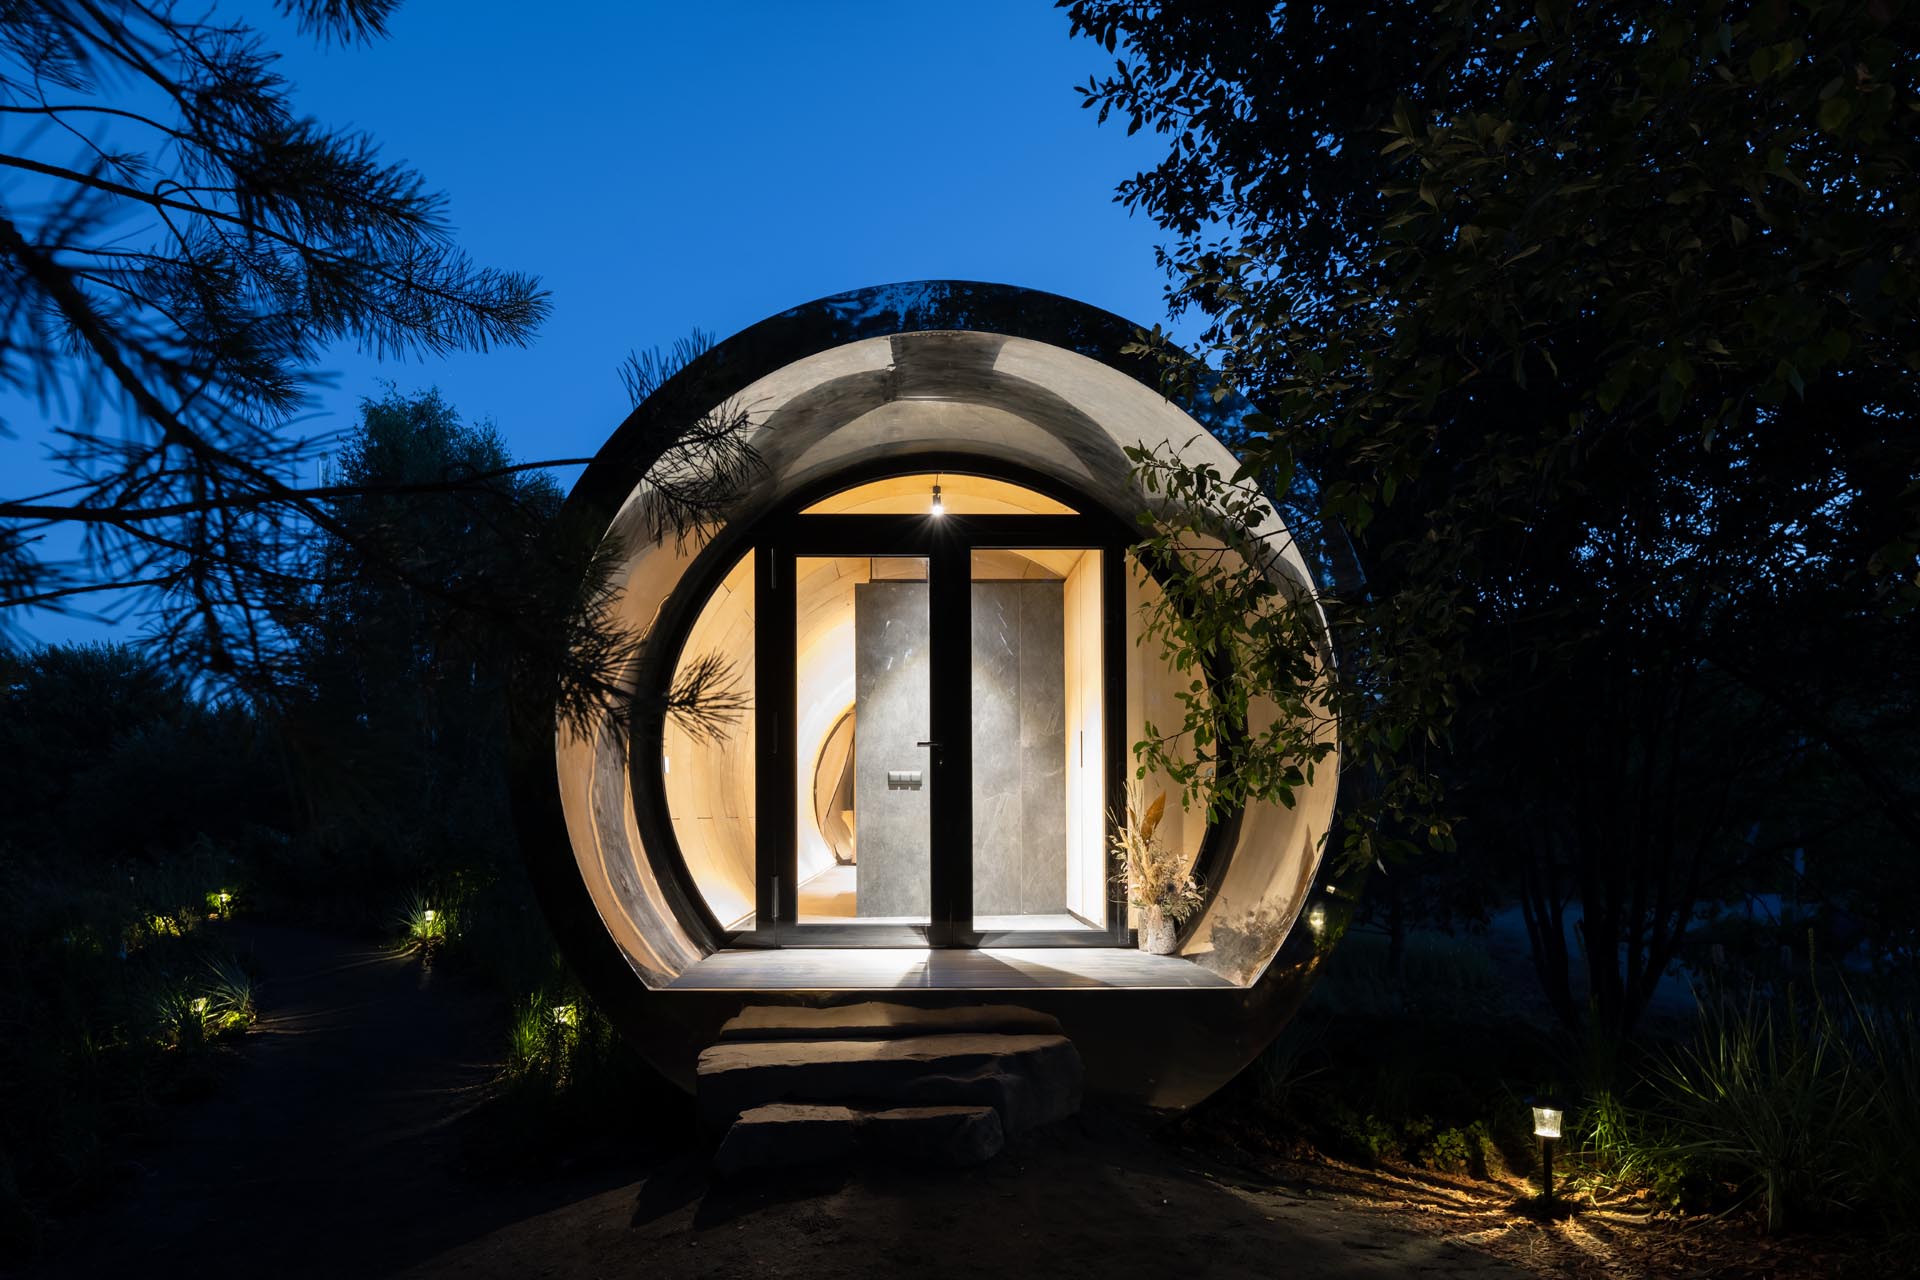 A unique tube-inspired cabin with a stainless steel exterior and a wood-lined interior.